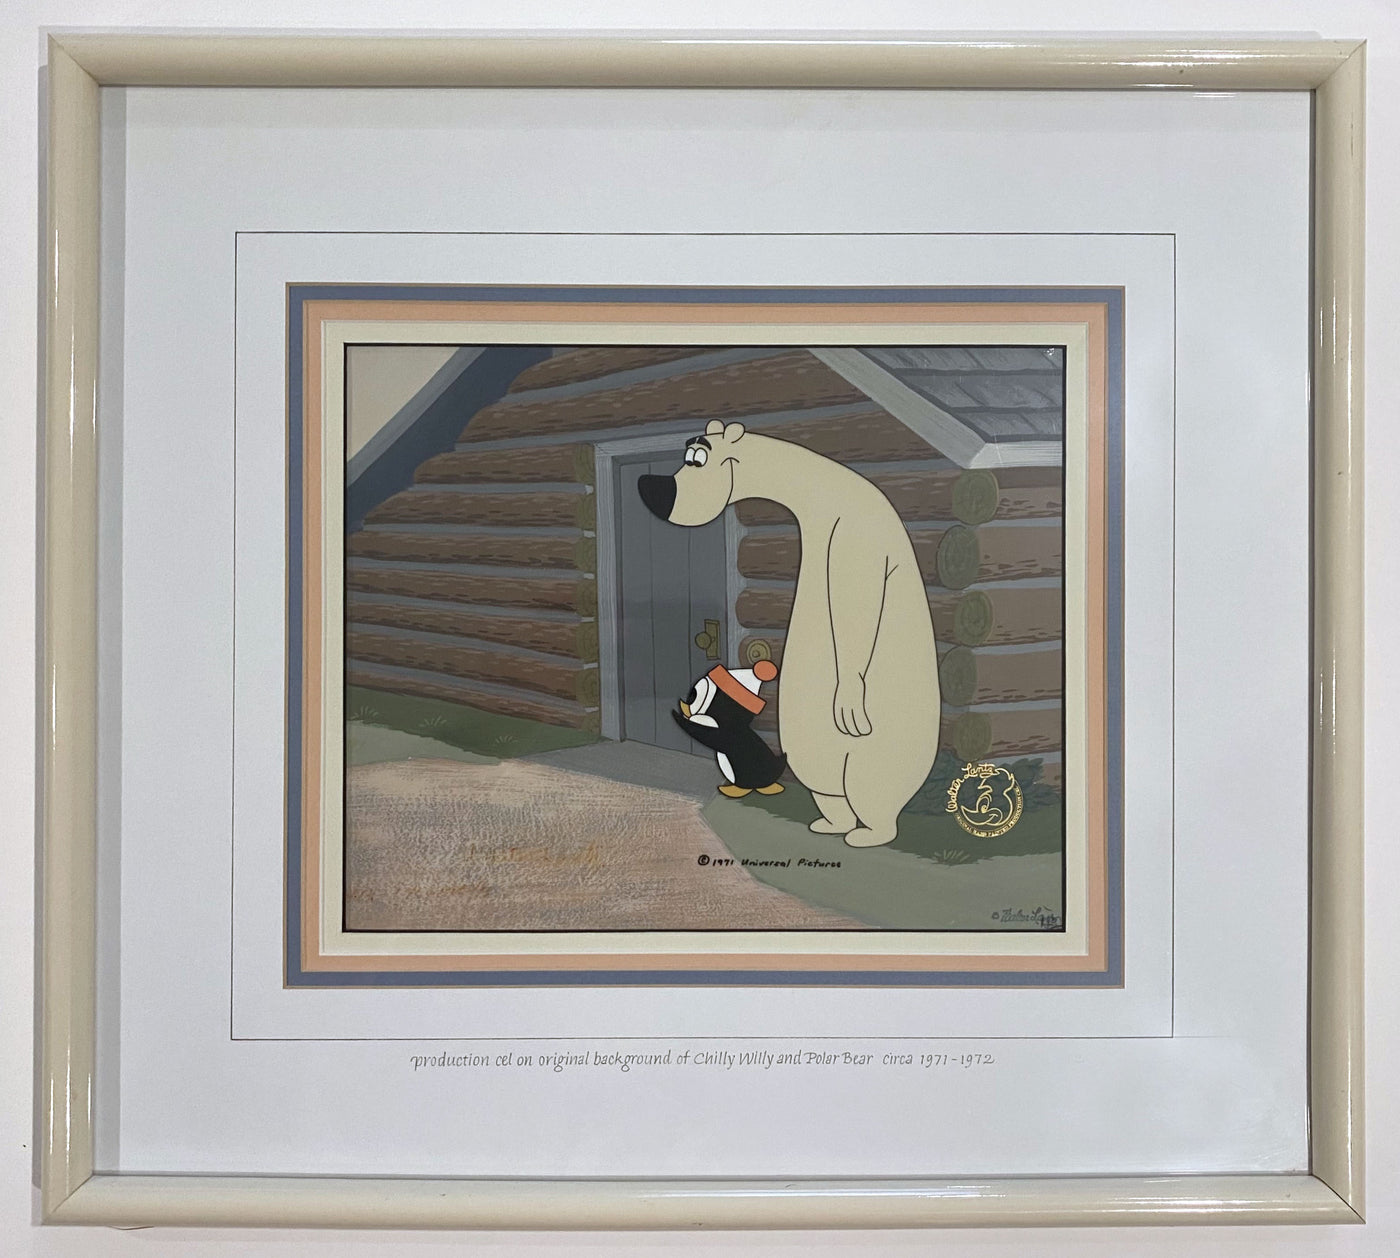 Original Walter Lantz Studios Production Cel on Production Background of Chilly Willy and Polar Bear